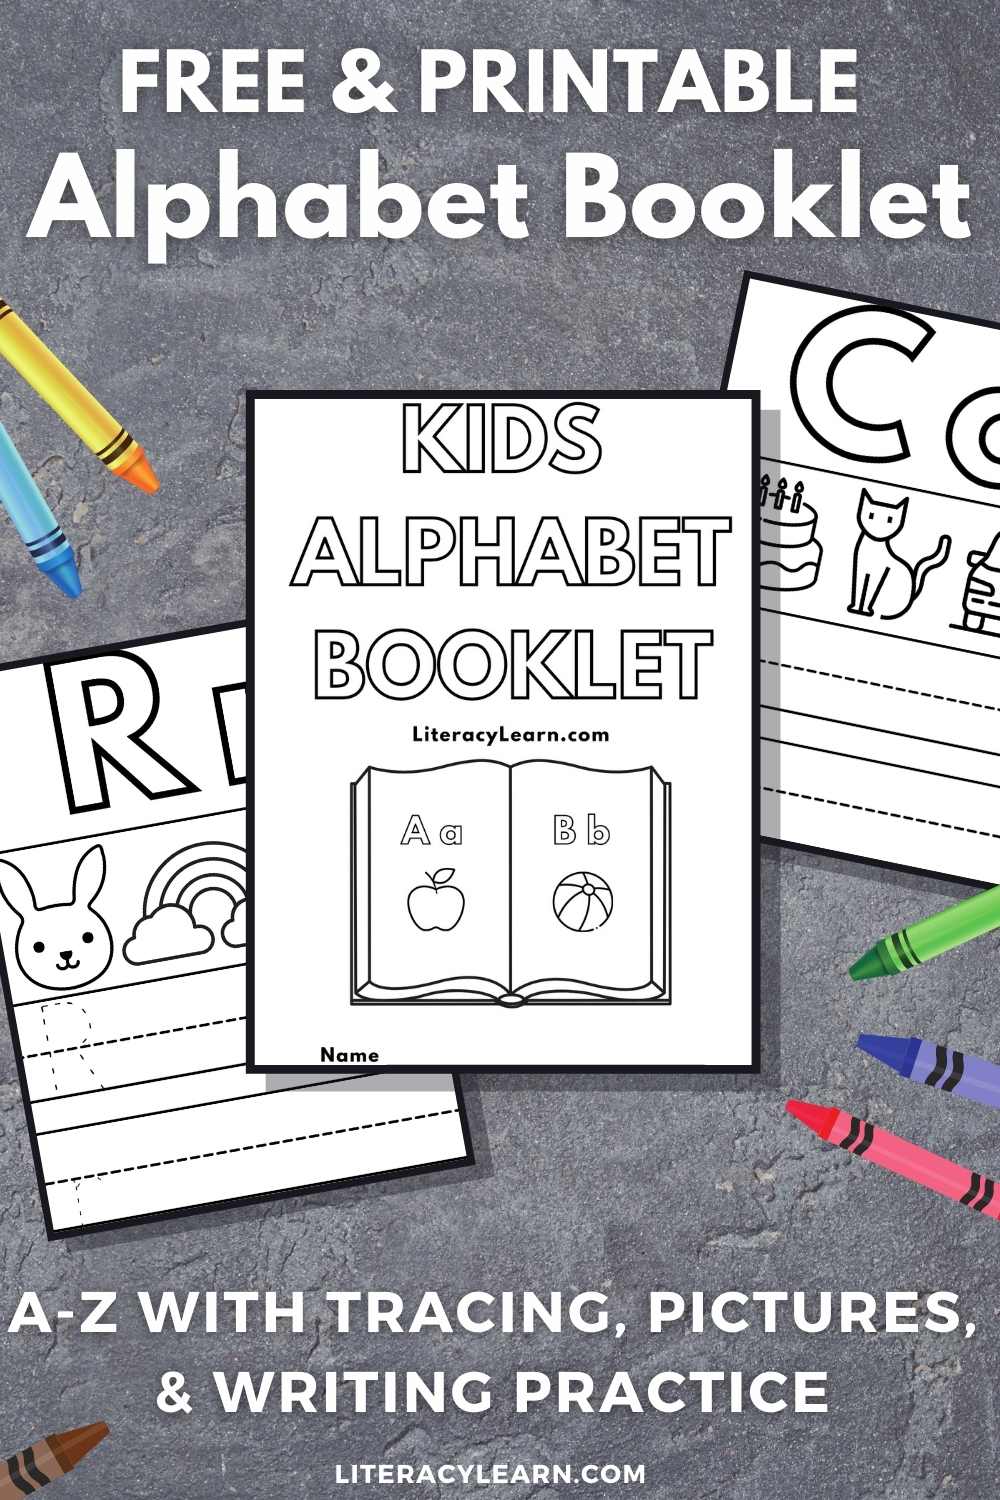 Printable Alphabet Book for Kids Free Download! Literacy Learn